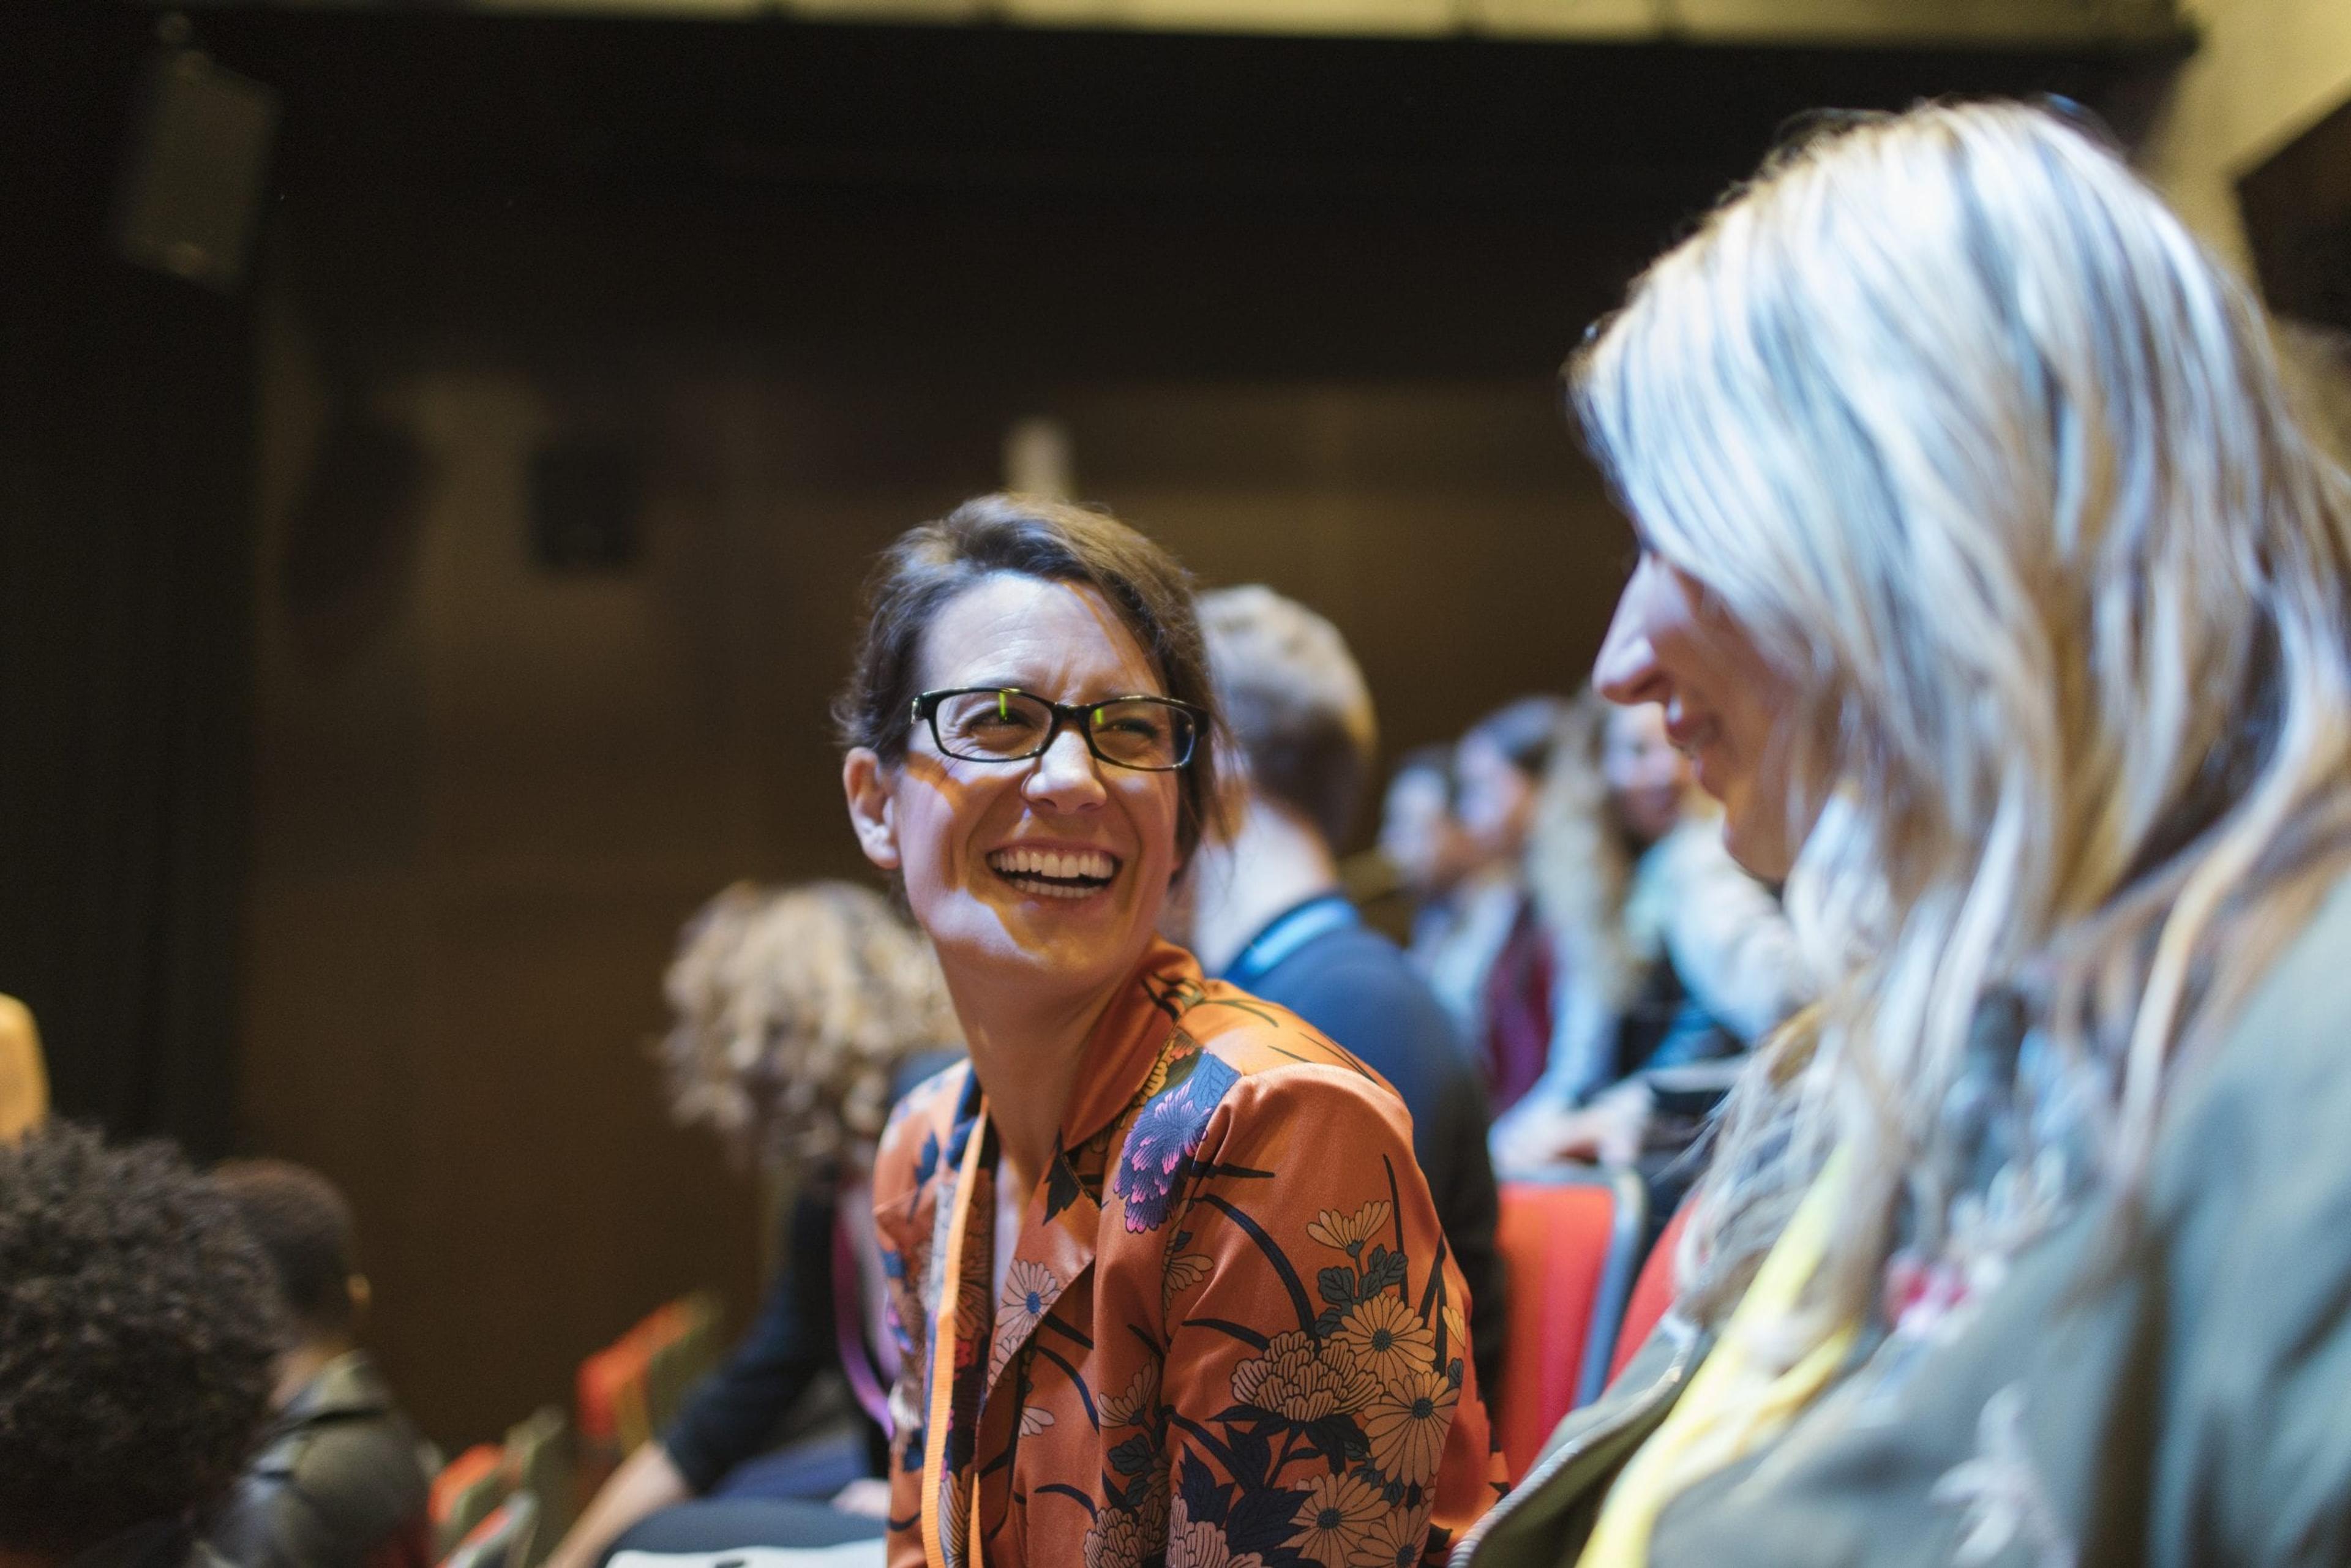 Women talking and laughing at a business conference